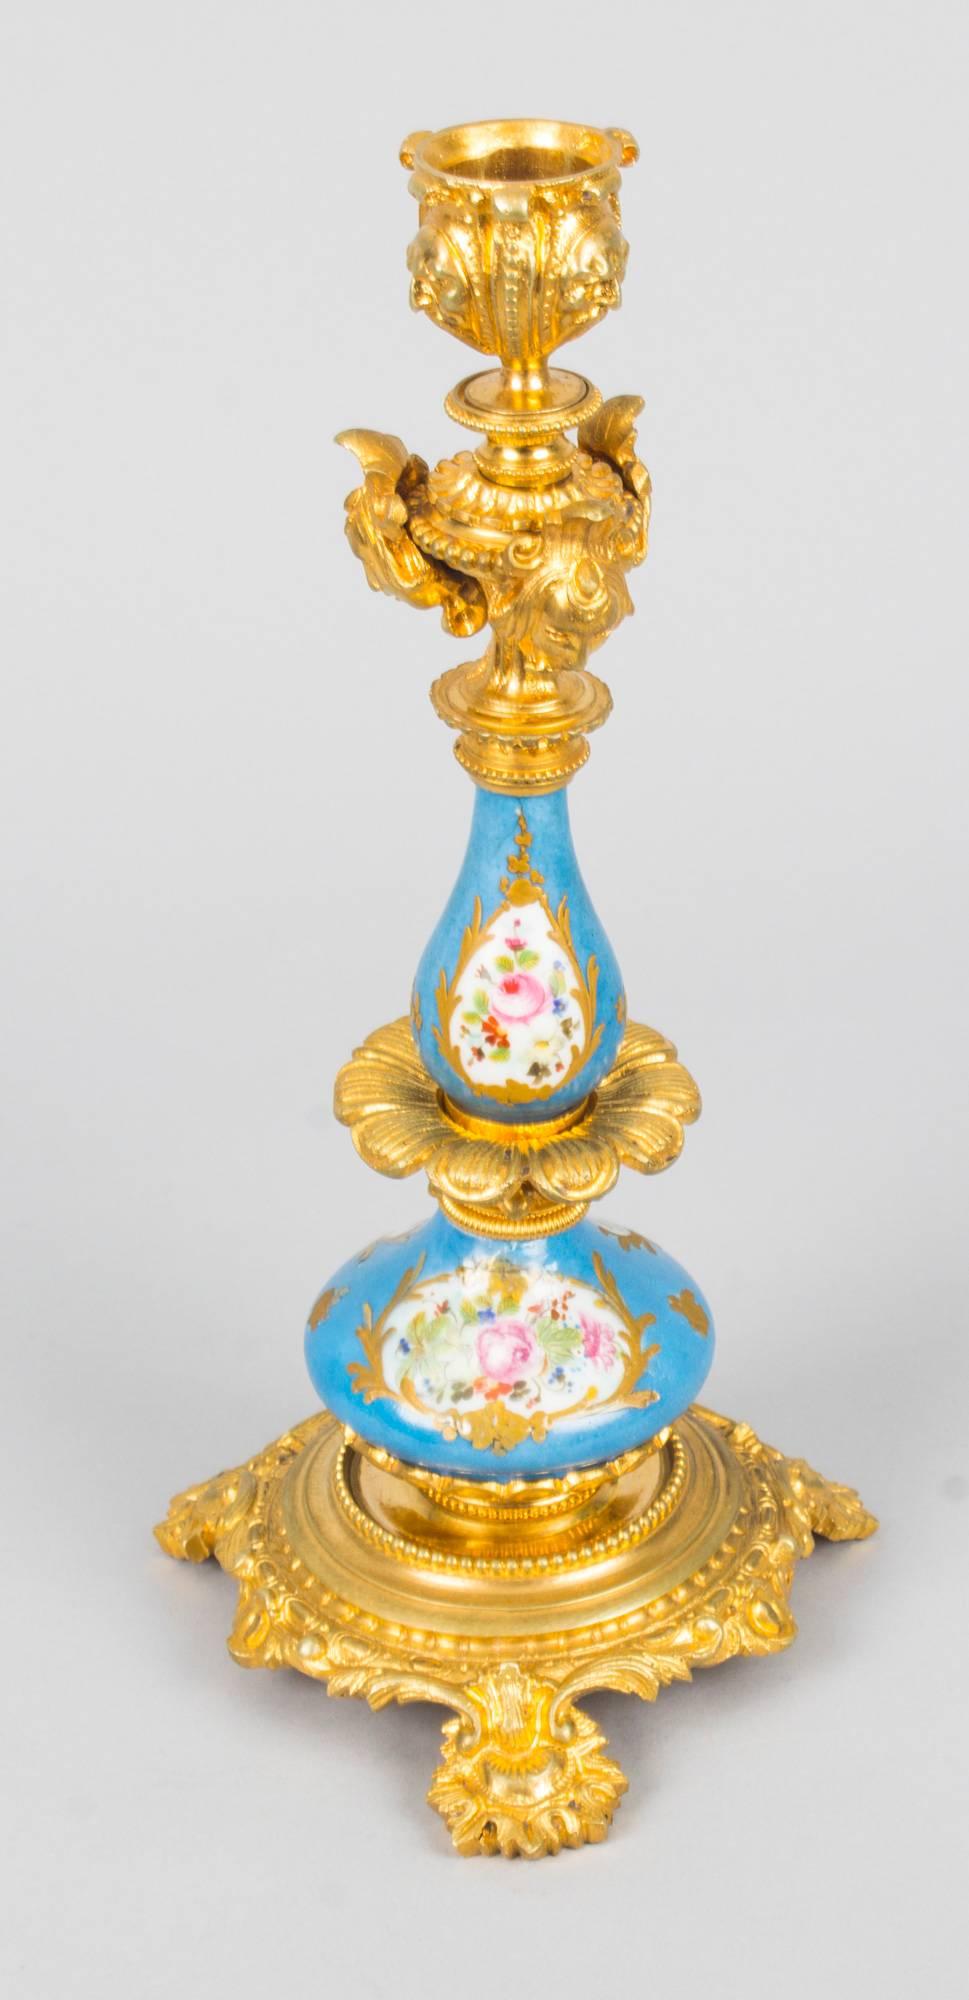 This is a delightful antique pair of 19th century French Sèvres Porcelain mounted ormolu candlesticks.
 
The baluster shaped Sèvres Porcelain columns feature hand painted panels of summer flowers on a bleu celeste ground with gilt highlights. They